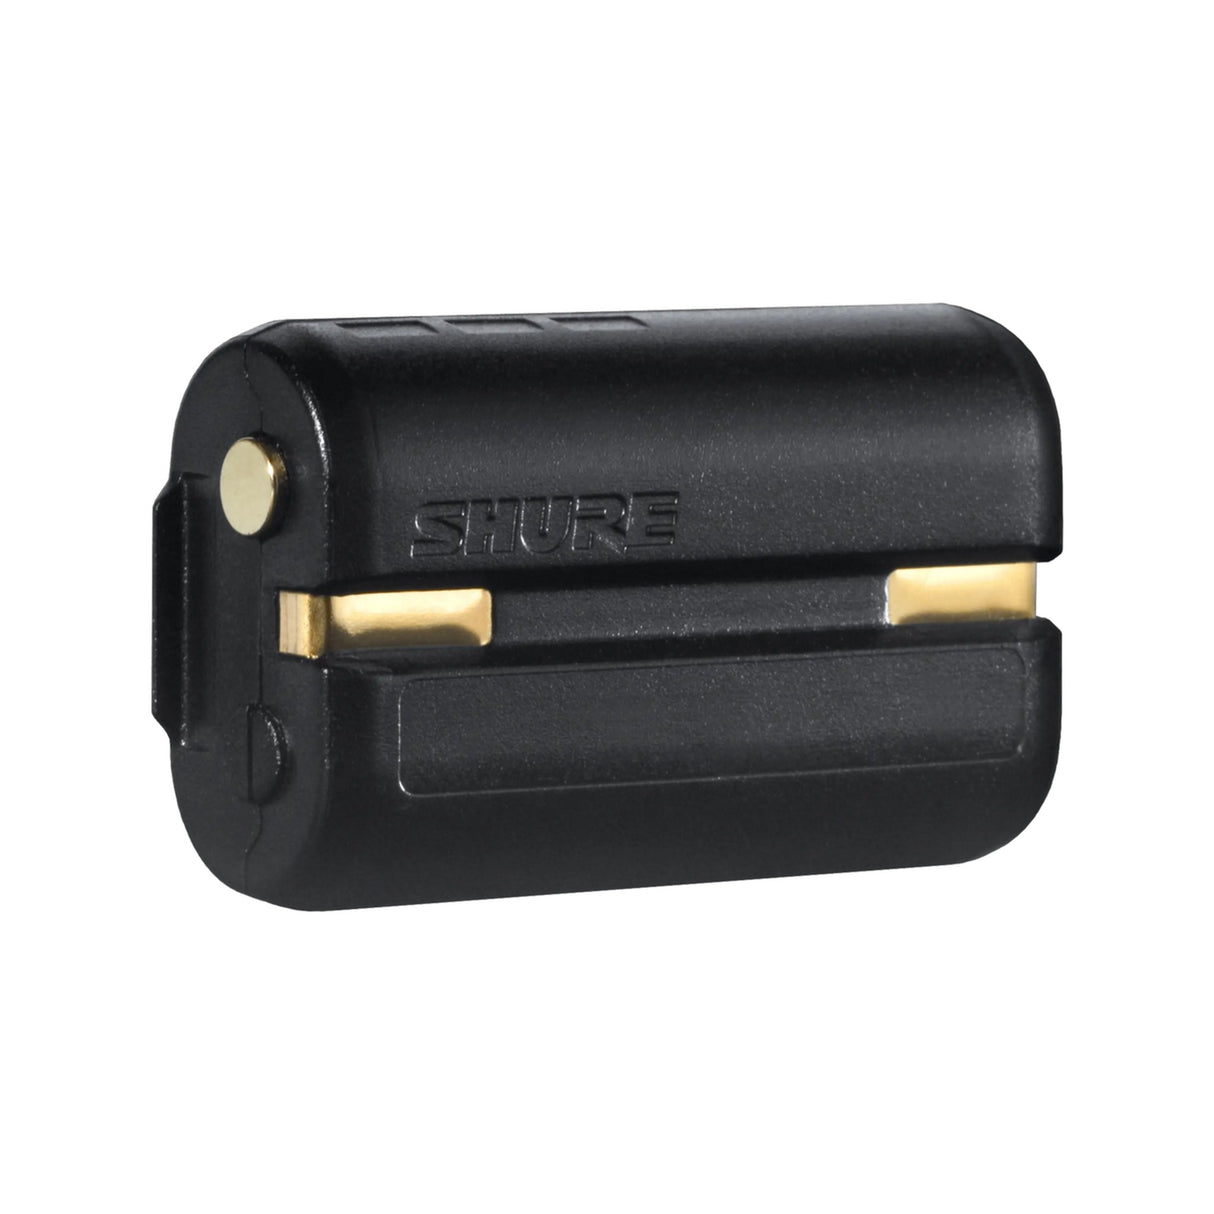 Genuine Shure SB900 Lithium-Ion Rechargeable Battery for Body Packs Receivers (QLXD, ULXD, SLXD, PSM, and Axient Digital)